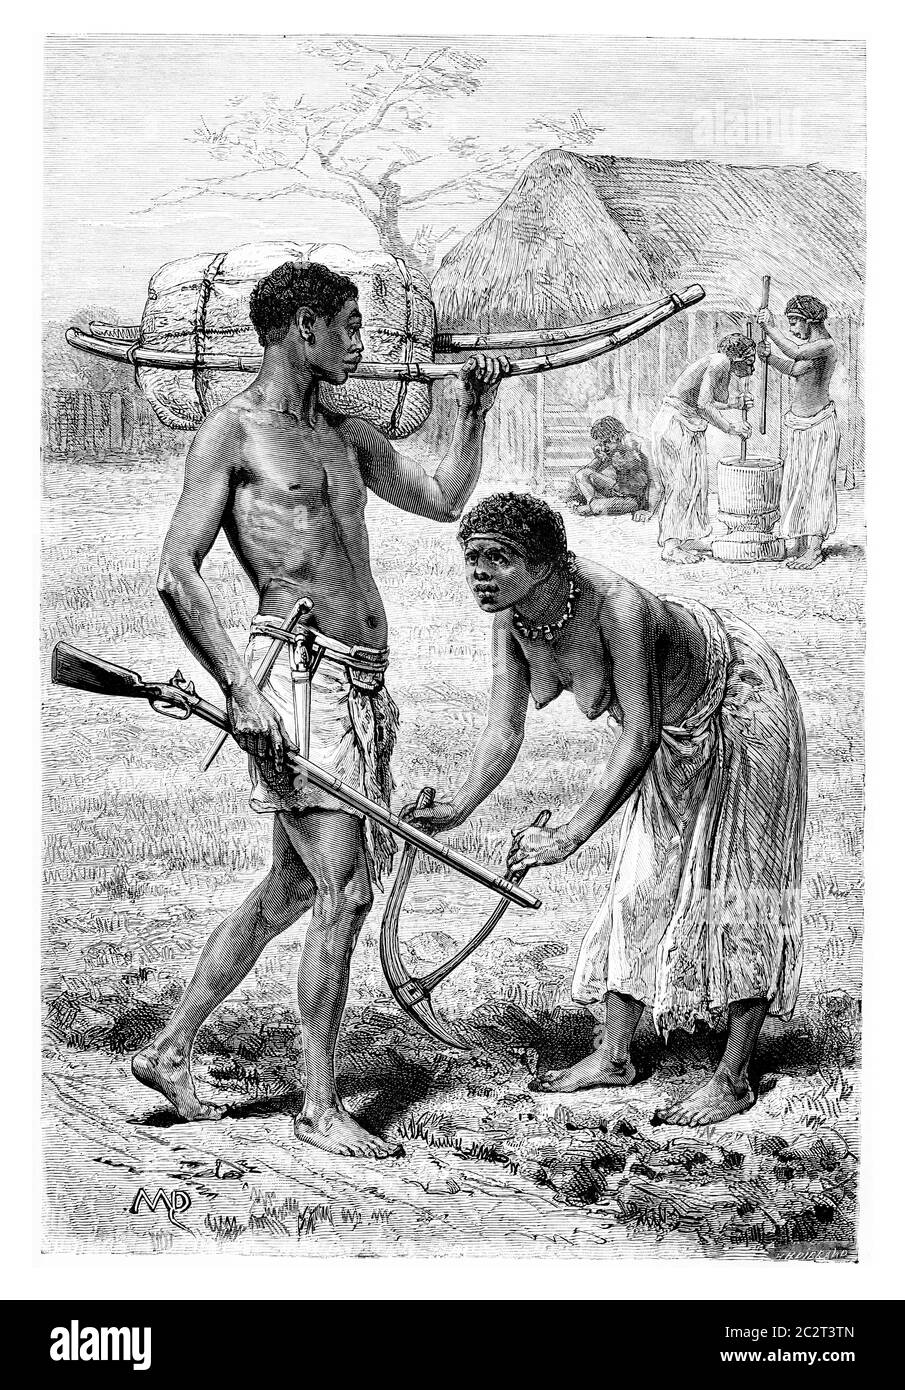 Man and Woman from Bie in Angola, Southern Africa, drawing by Maillart based on the English edition, vintage engraving. Le Tour du Monde, Travel Journ Stock Photo